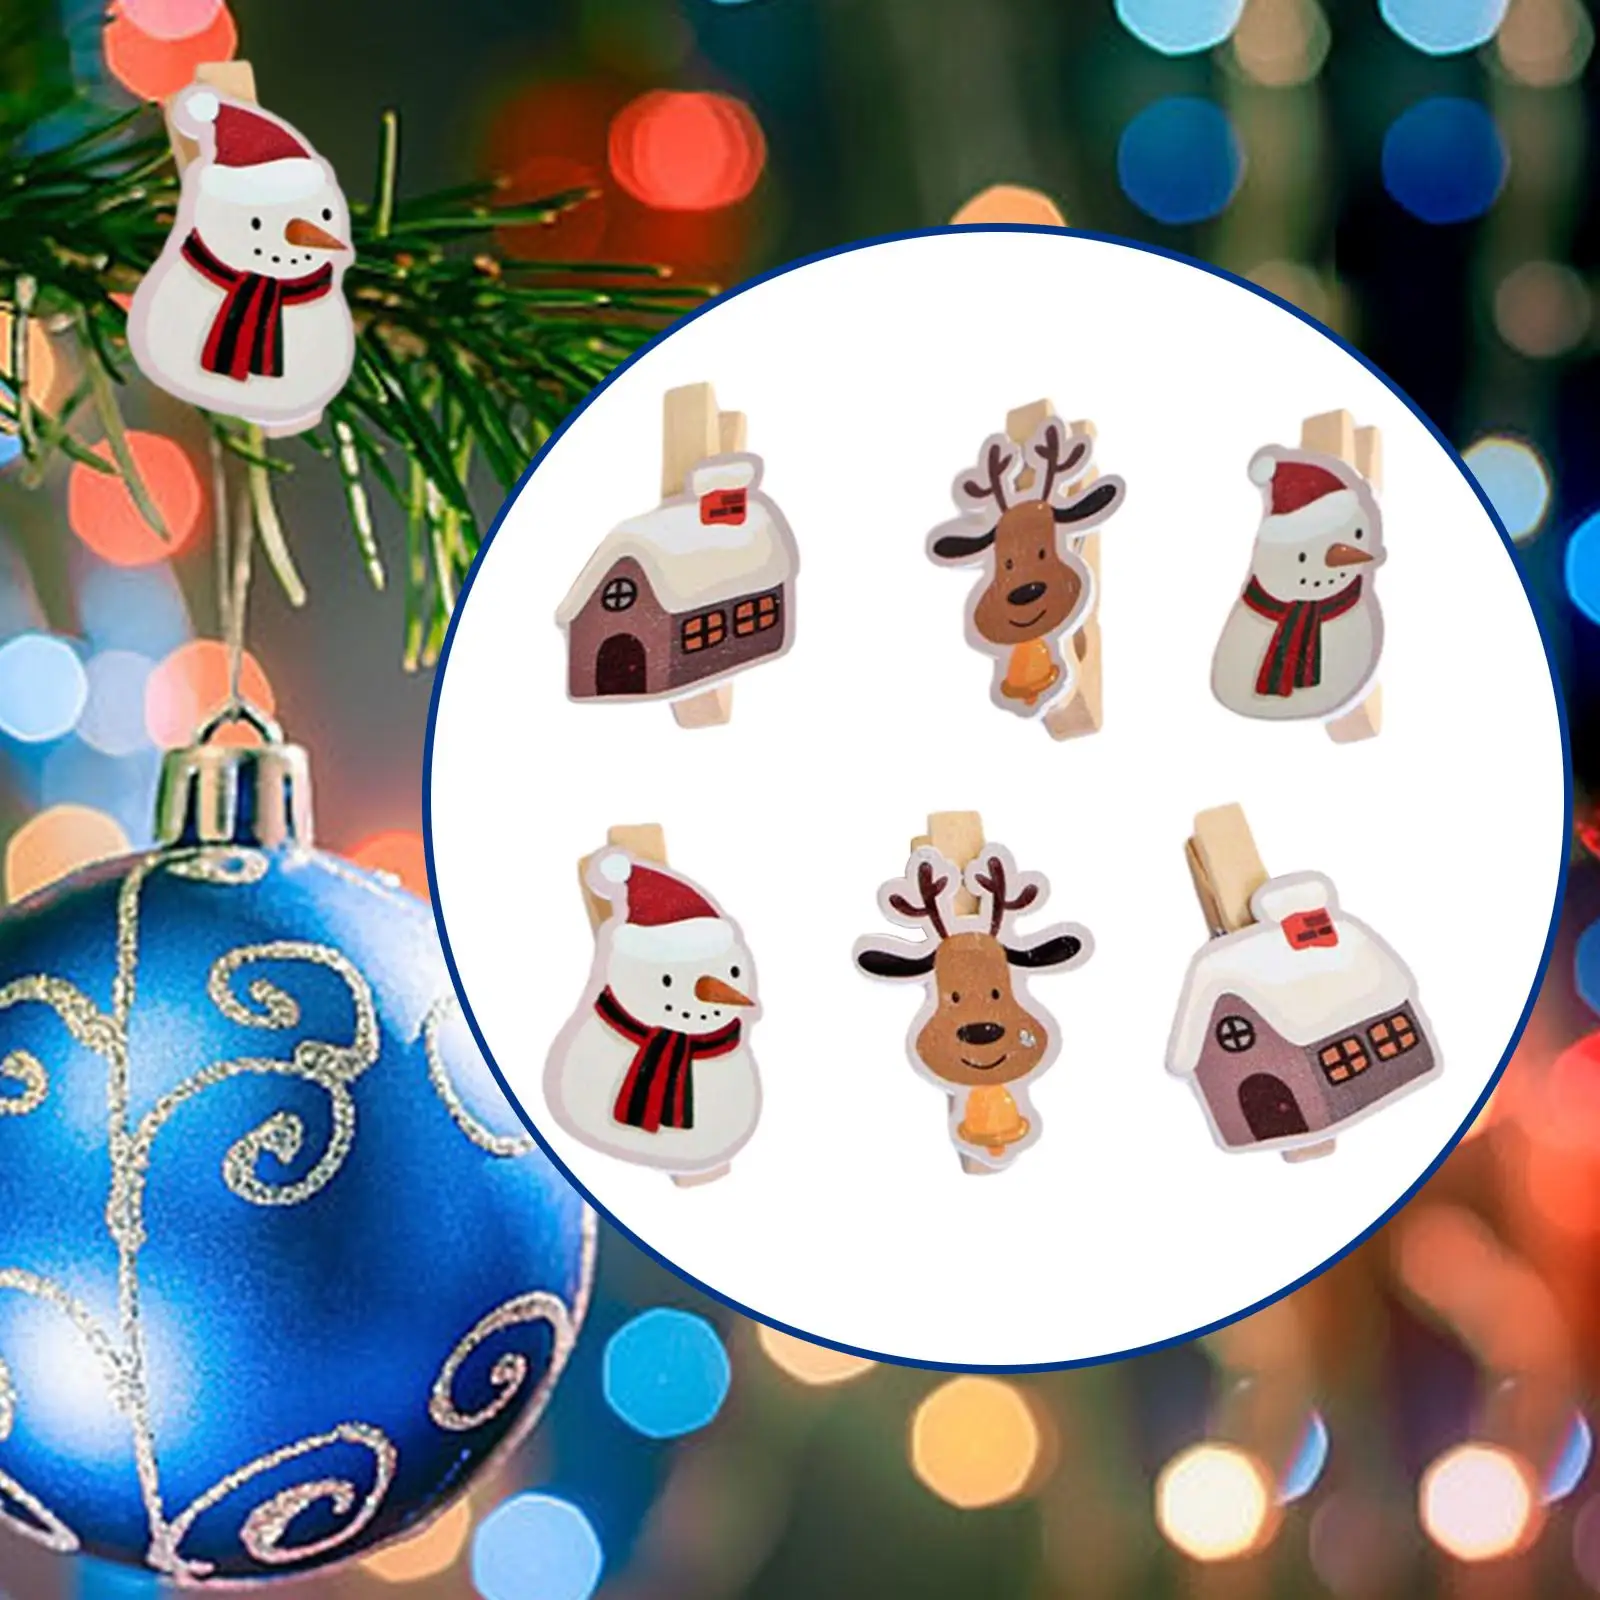 6 Pieces Christmas Wooden Clips Pictures Note Clips Cute Small Clothespins